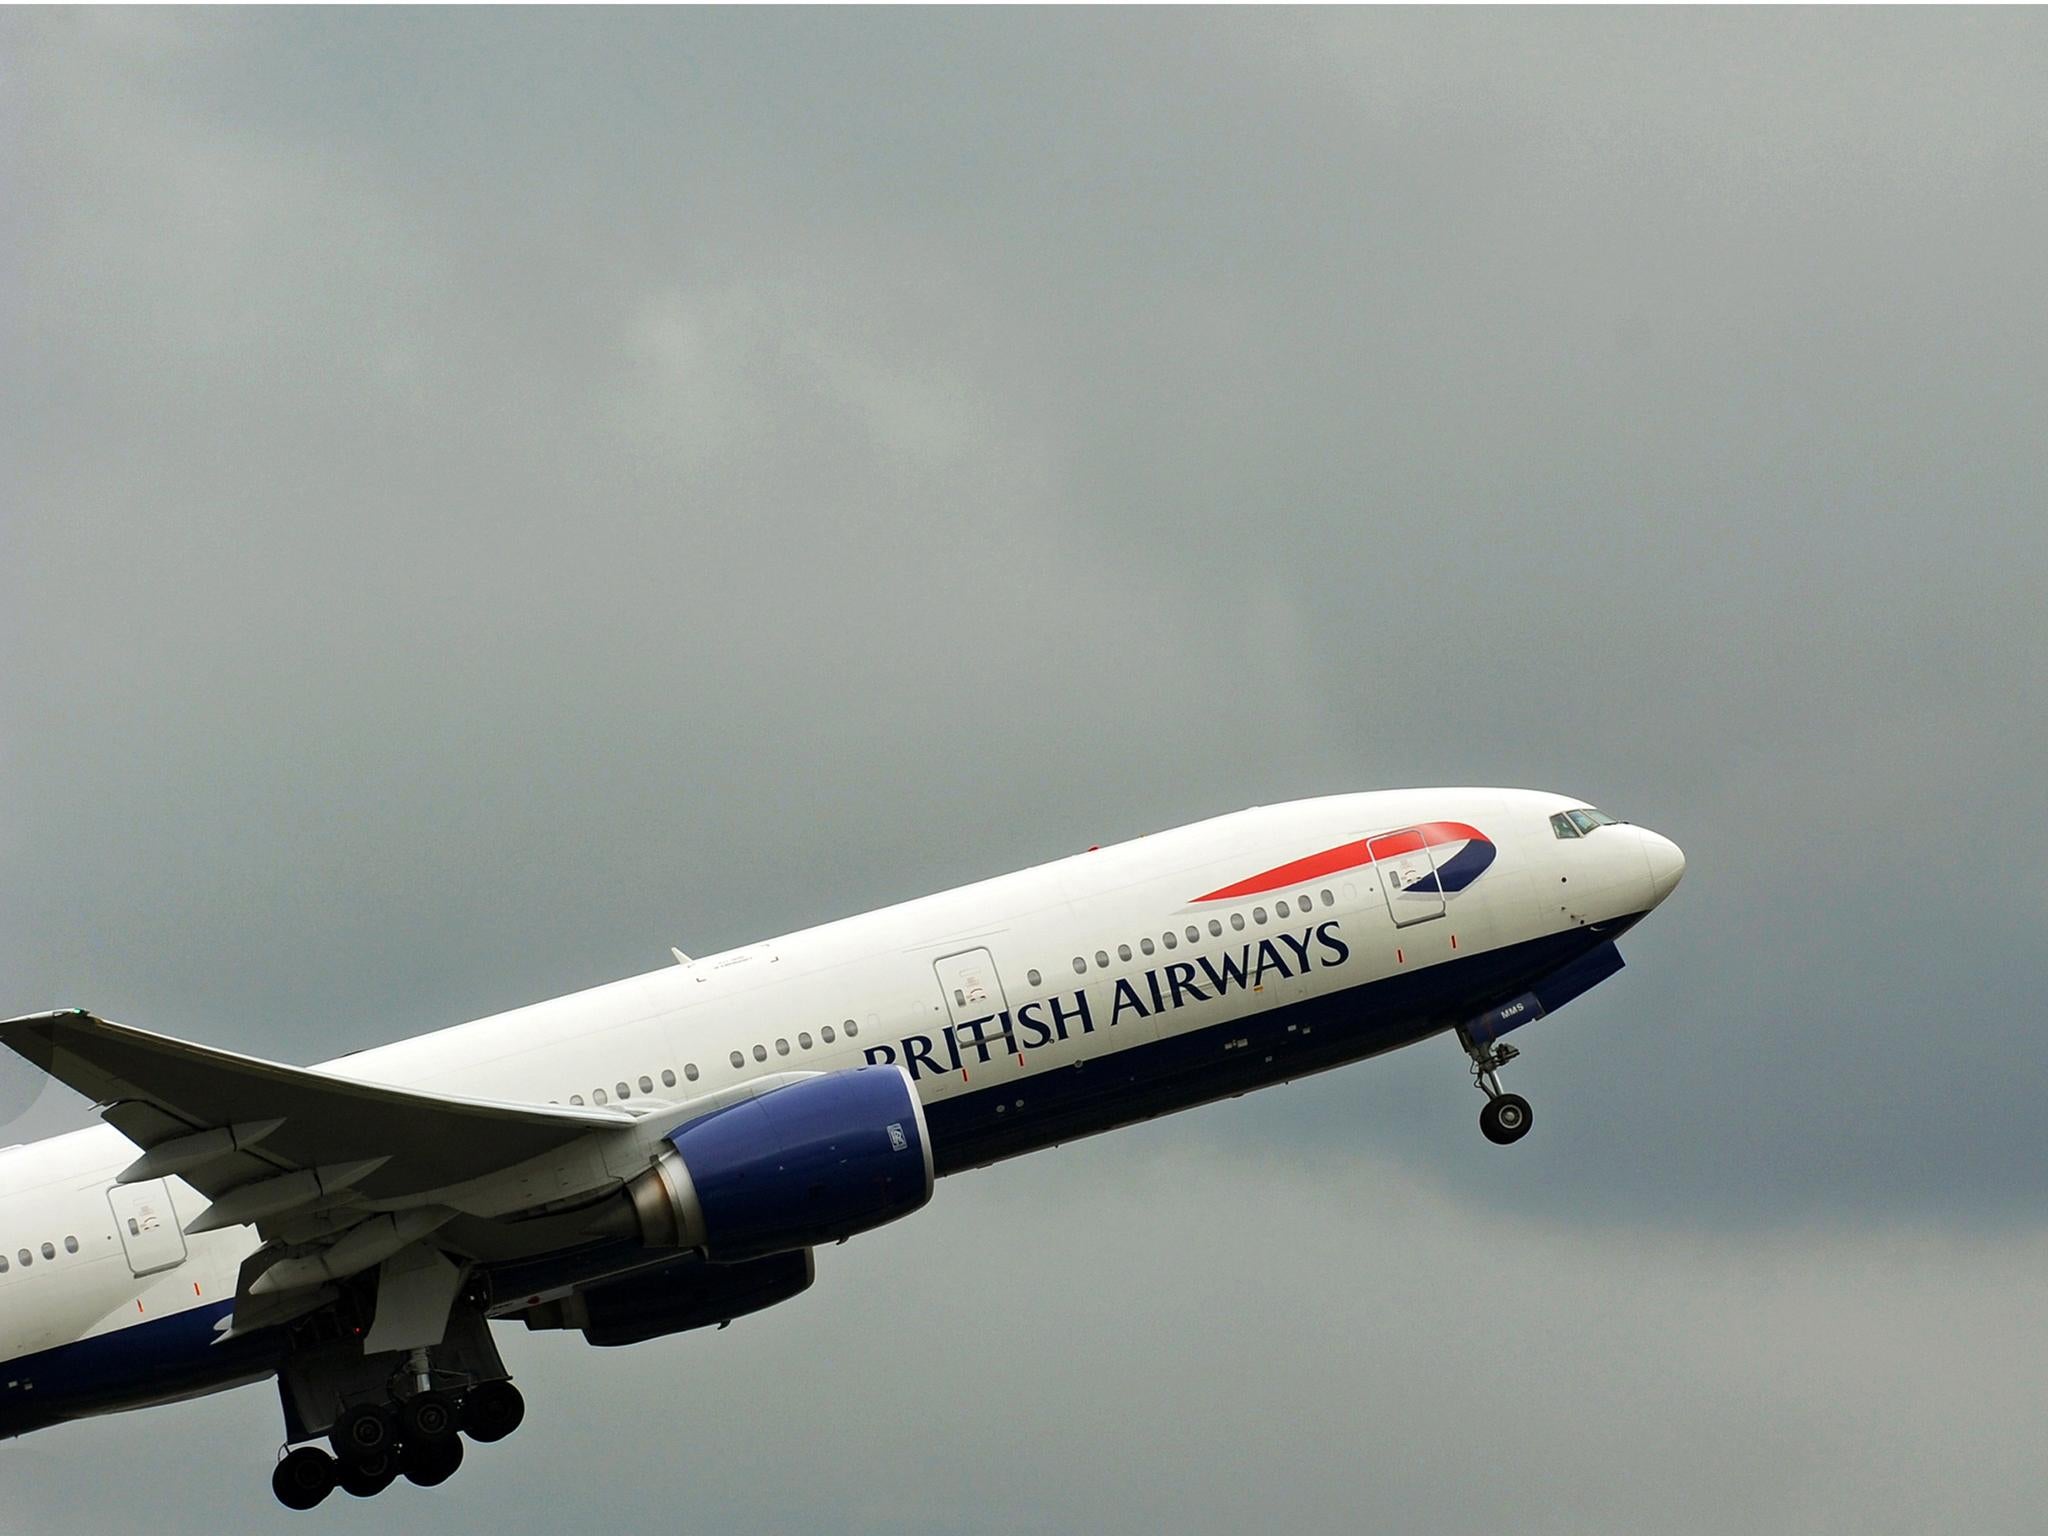 A British Airways jet takes off from London Heathrow Airport